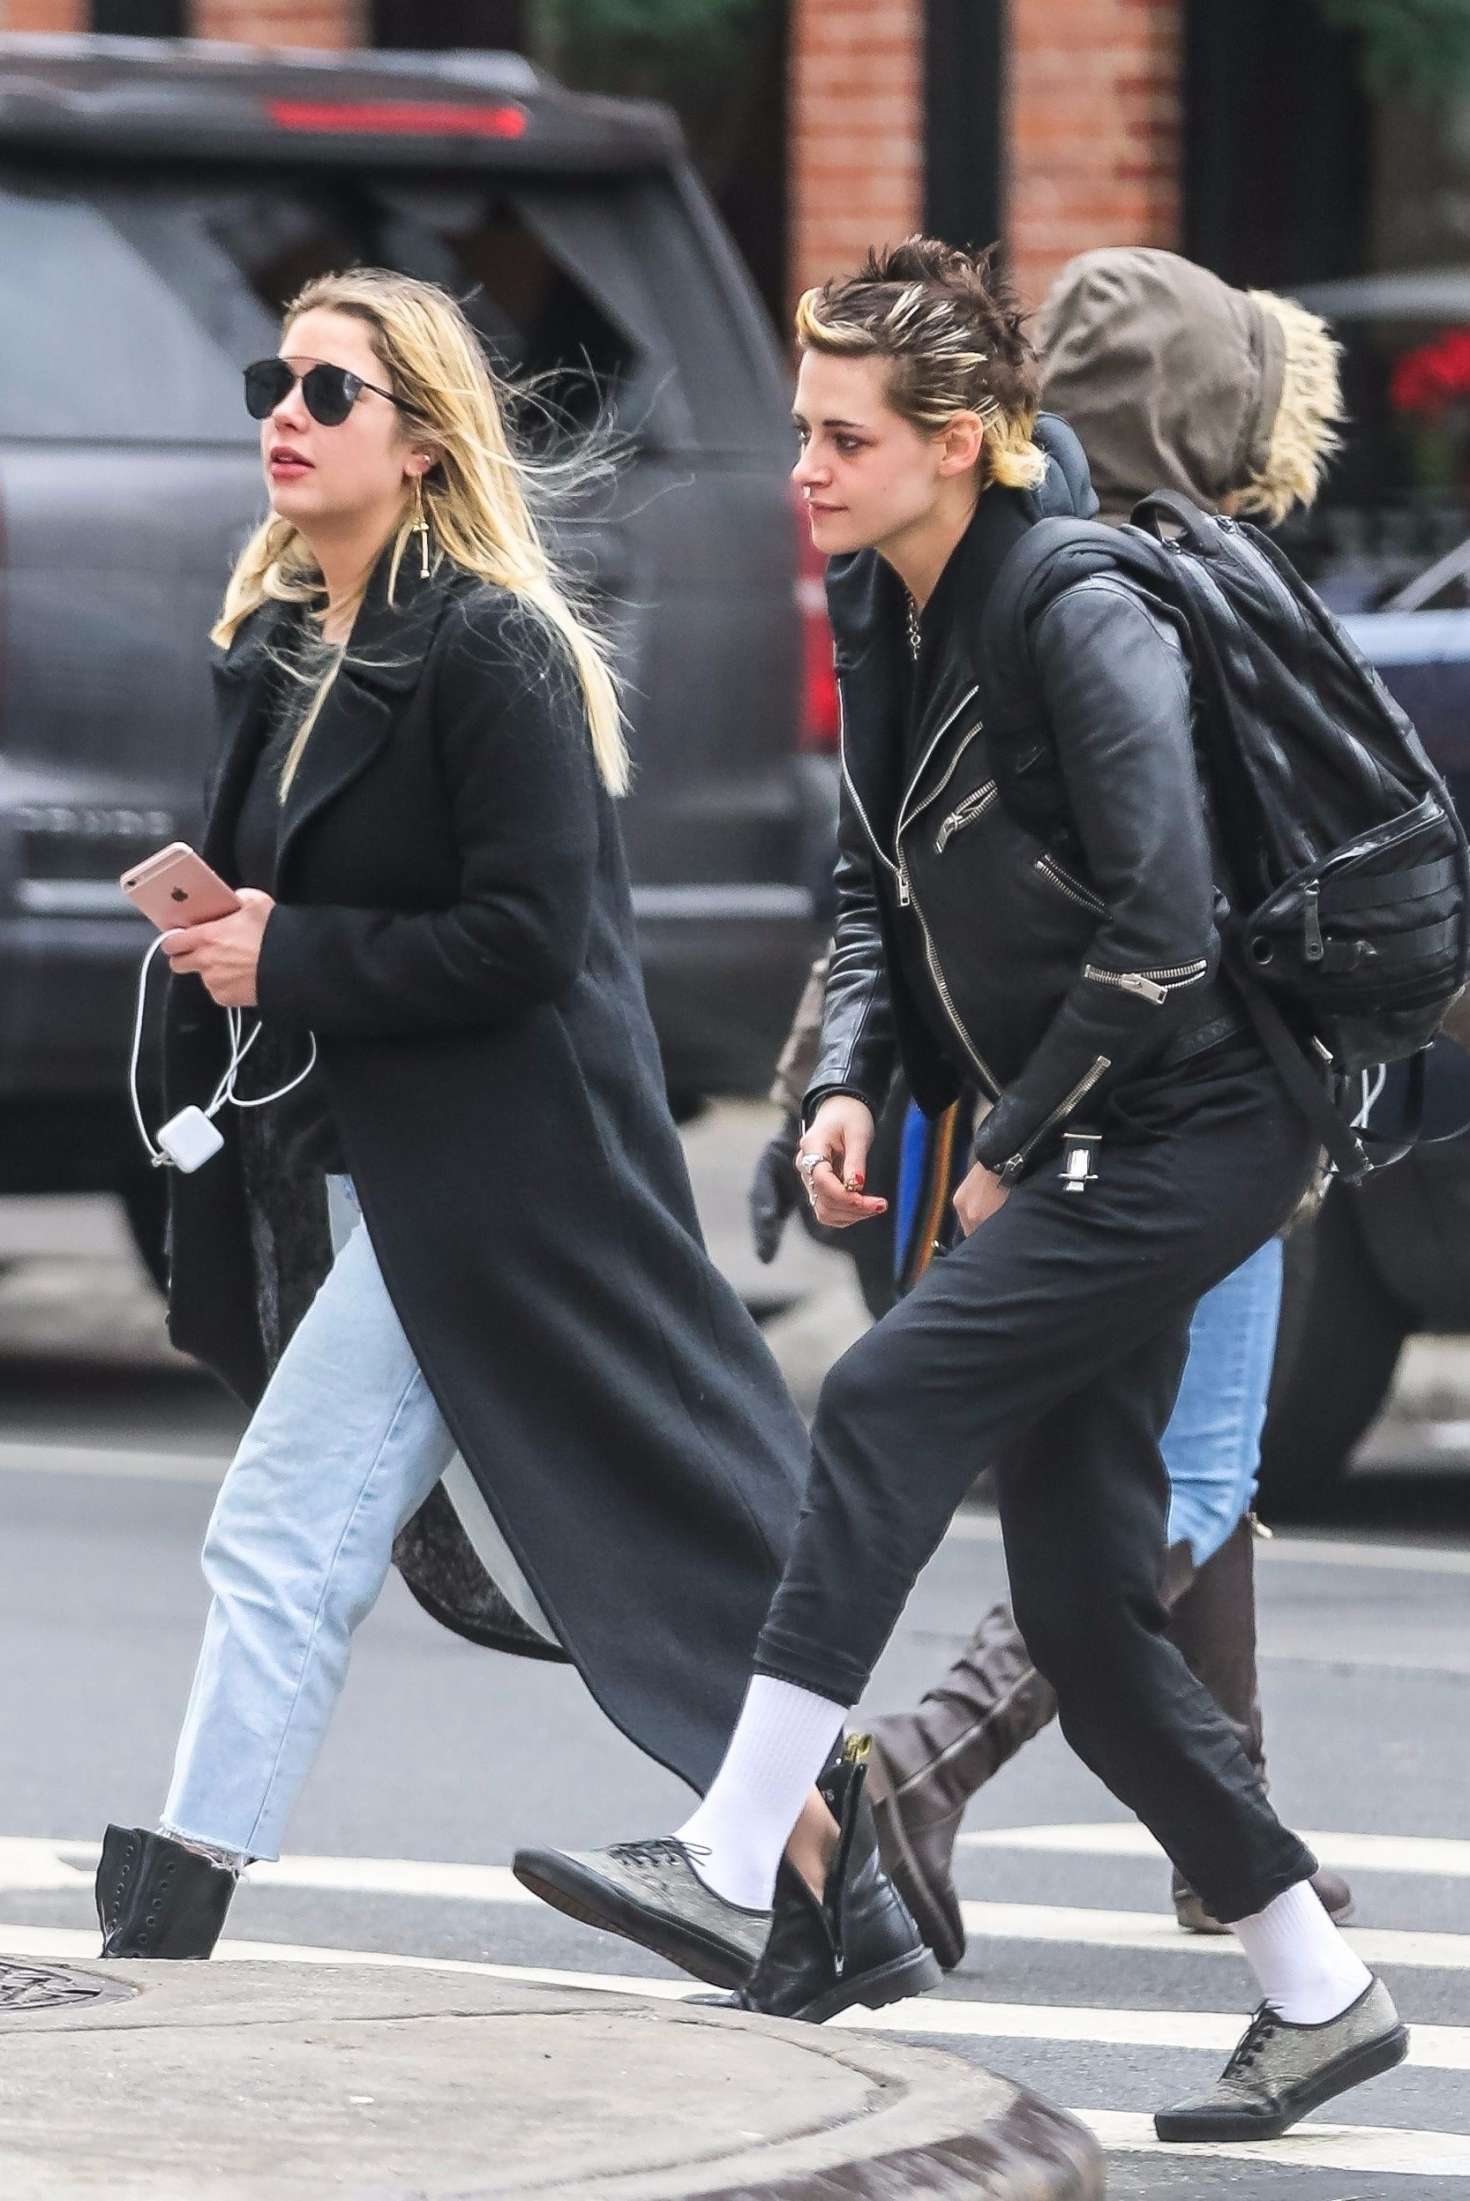 Ashley Benson and Kristen Stewart out together in NYC -14 | GotCeleb